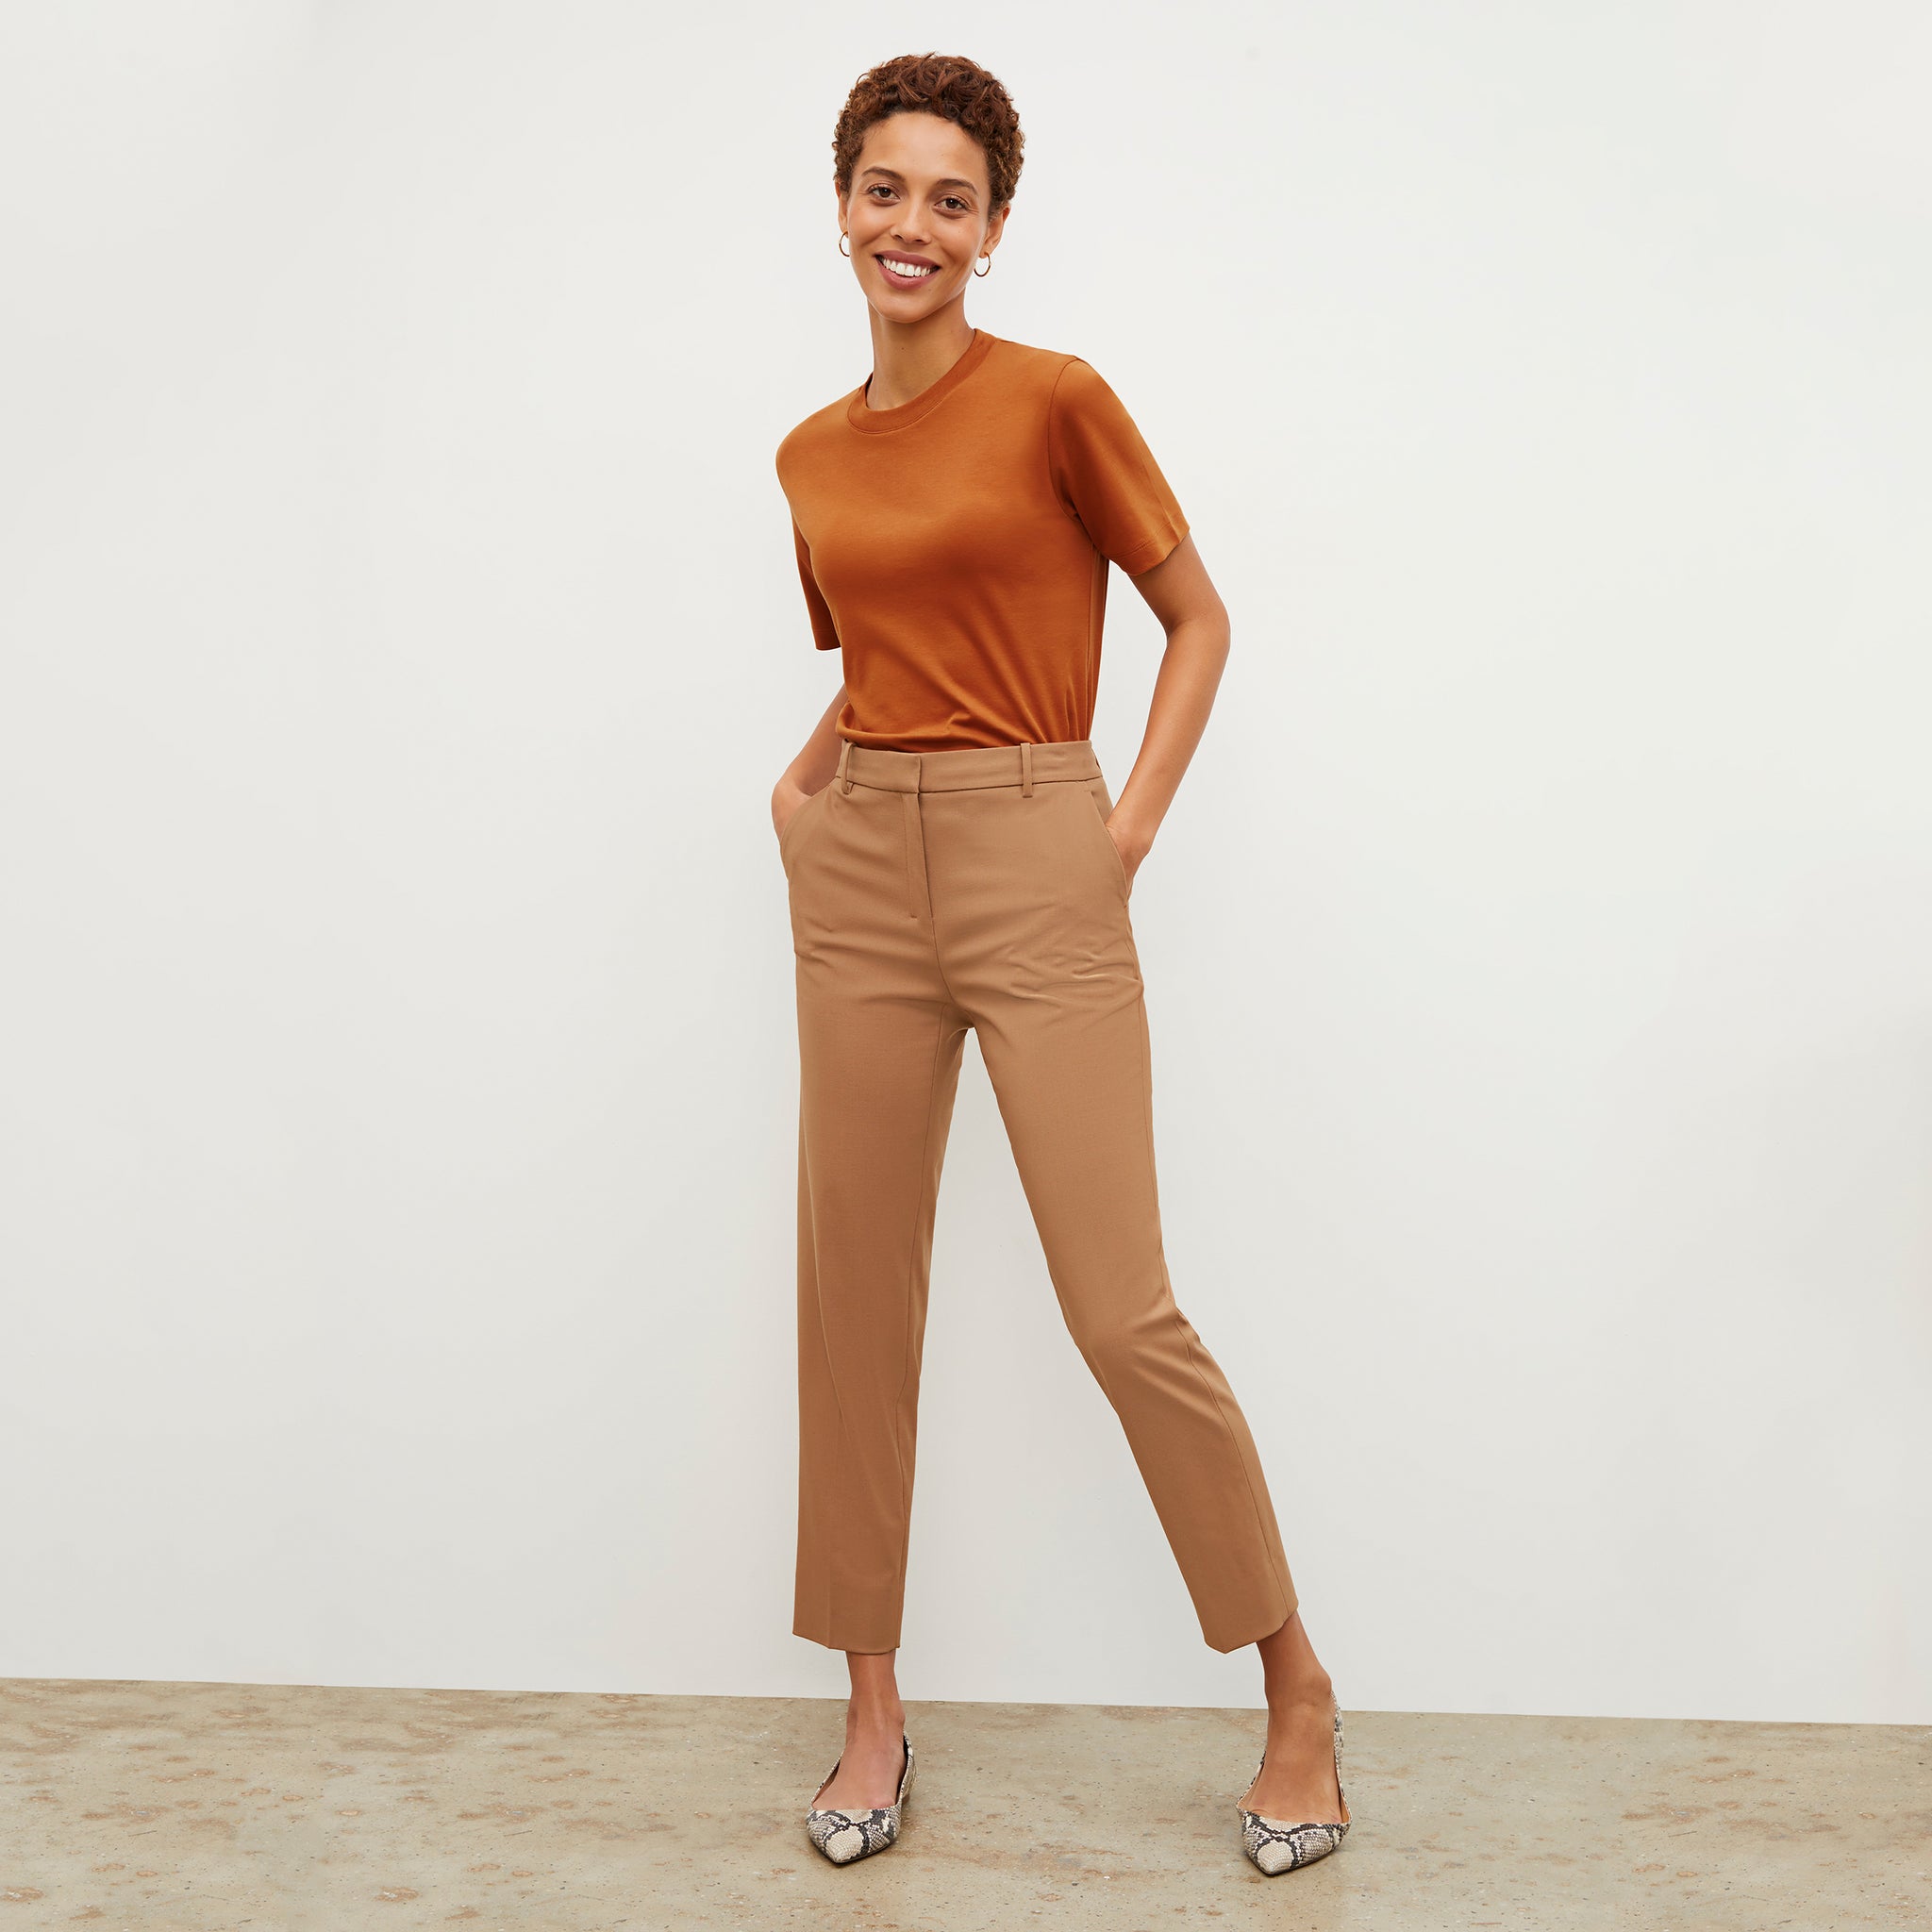 Front image of a woman standing wearing the Mejia pant in camel